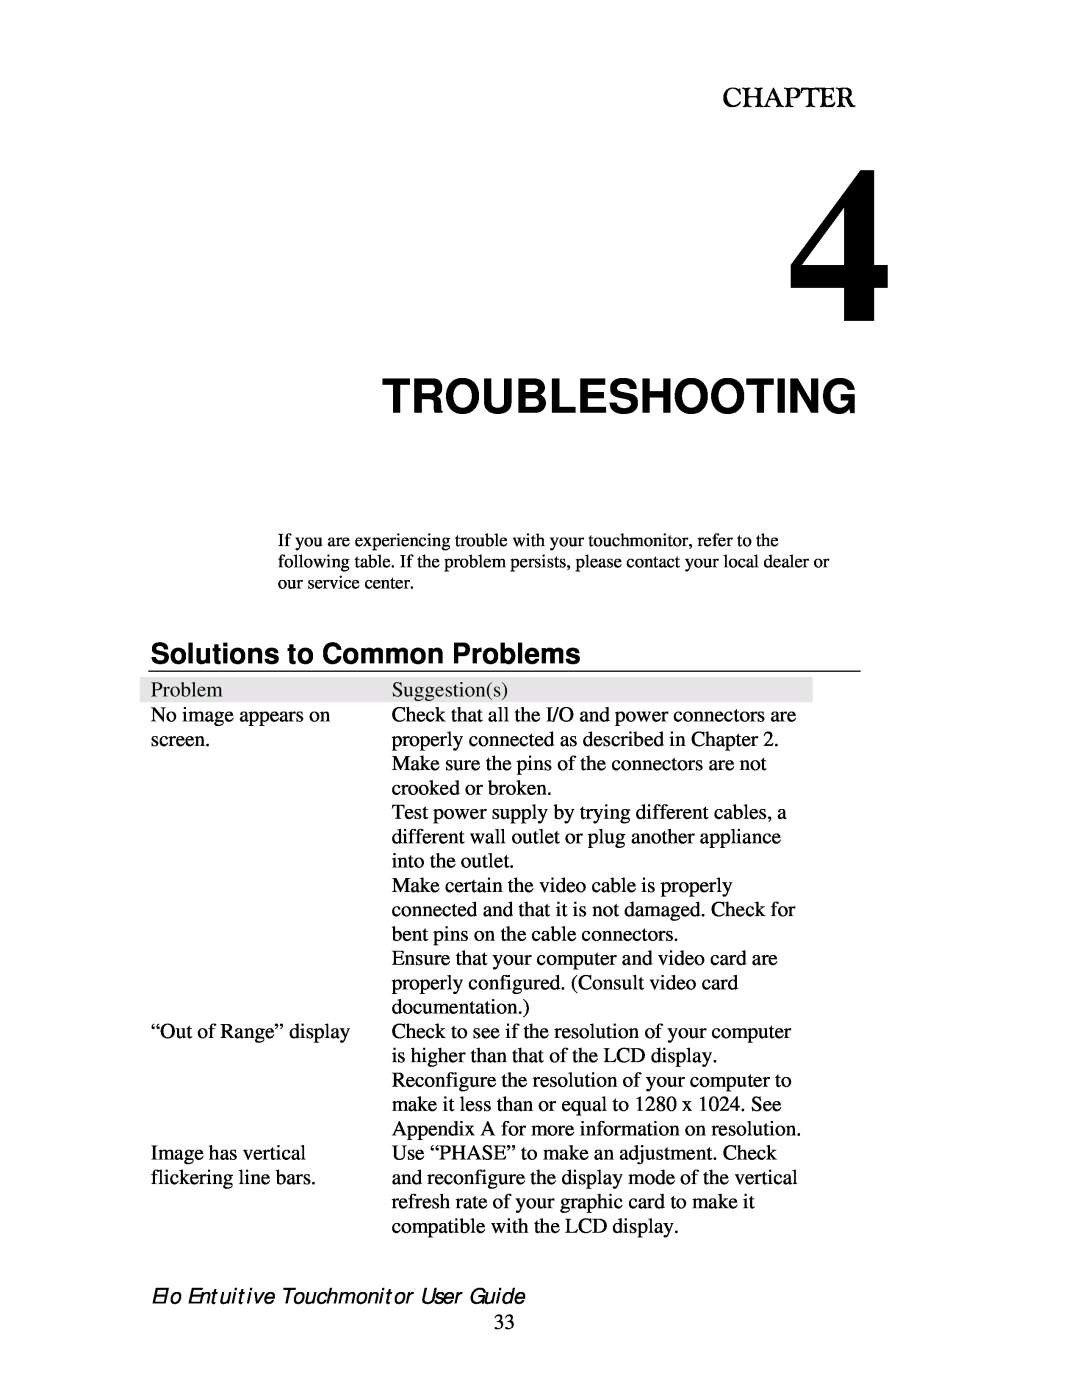 Elo TouchSystems 192XL-XXWA-1 Series manual Troubleshooting, Solutions to Common Problems, Chapter 